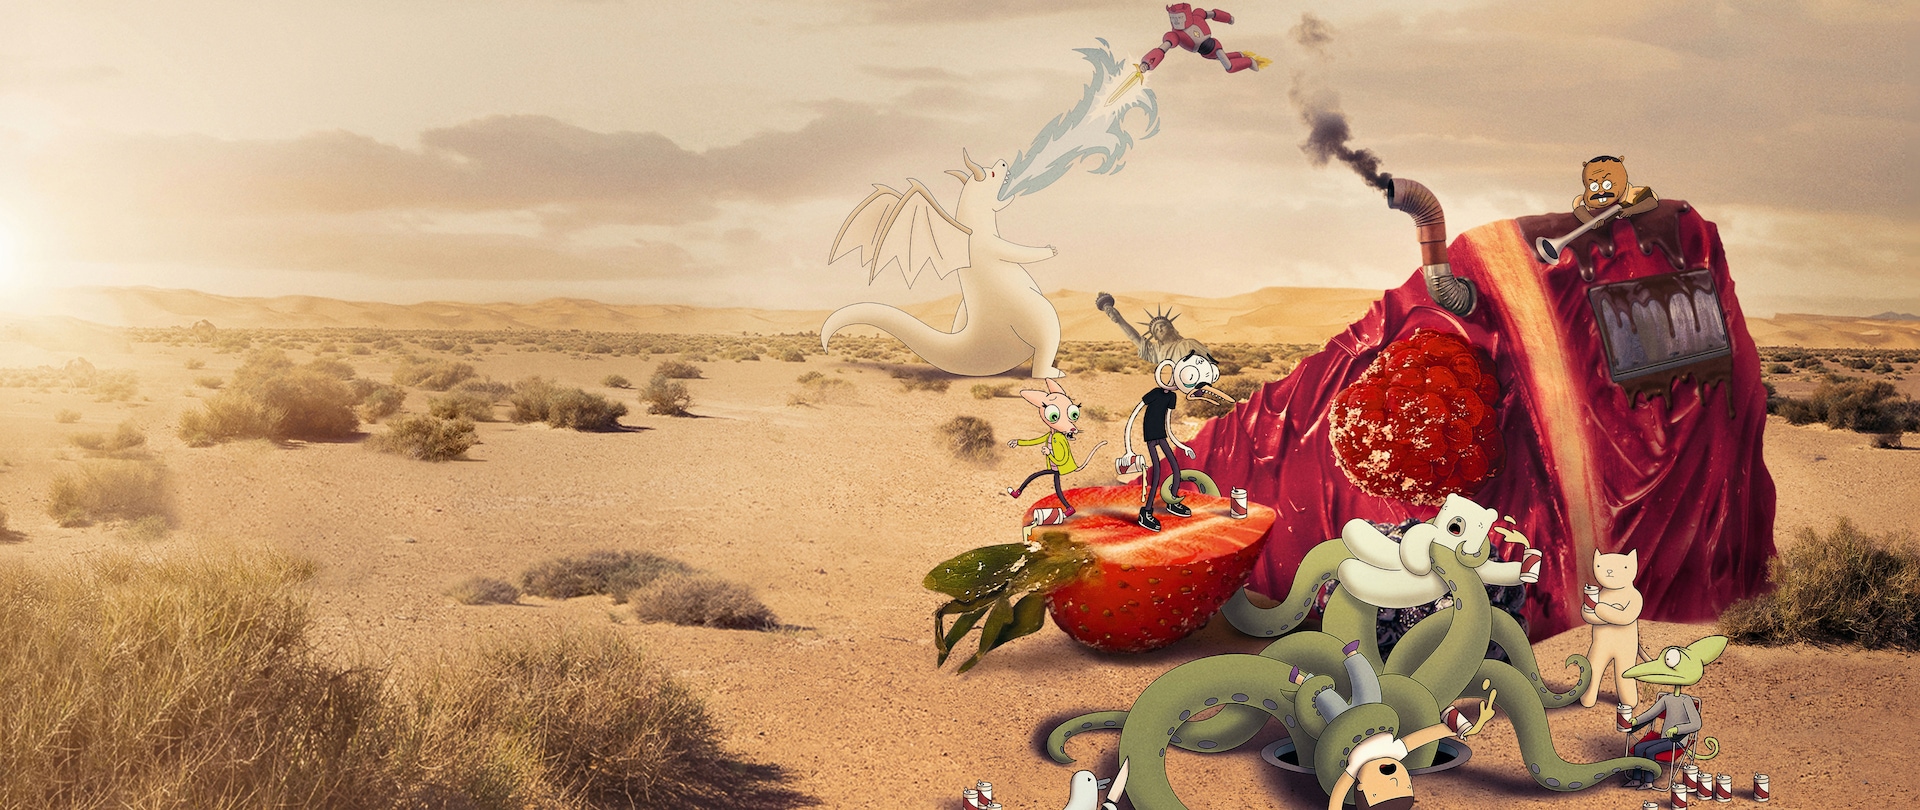 Desert landscape with raspberry cake turned into a house with chimney and animated characters surrounding it fighting